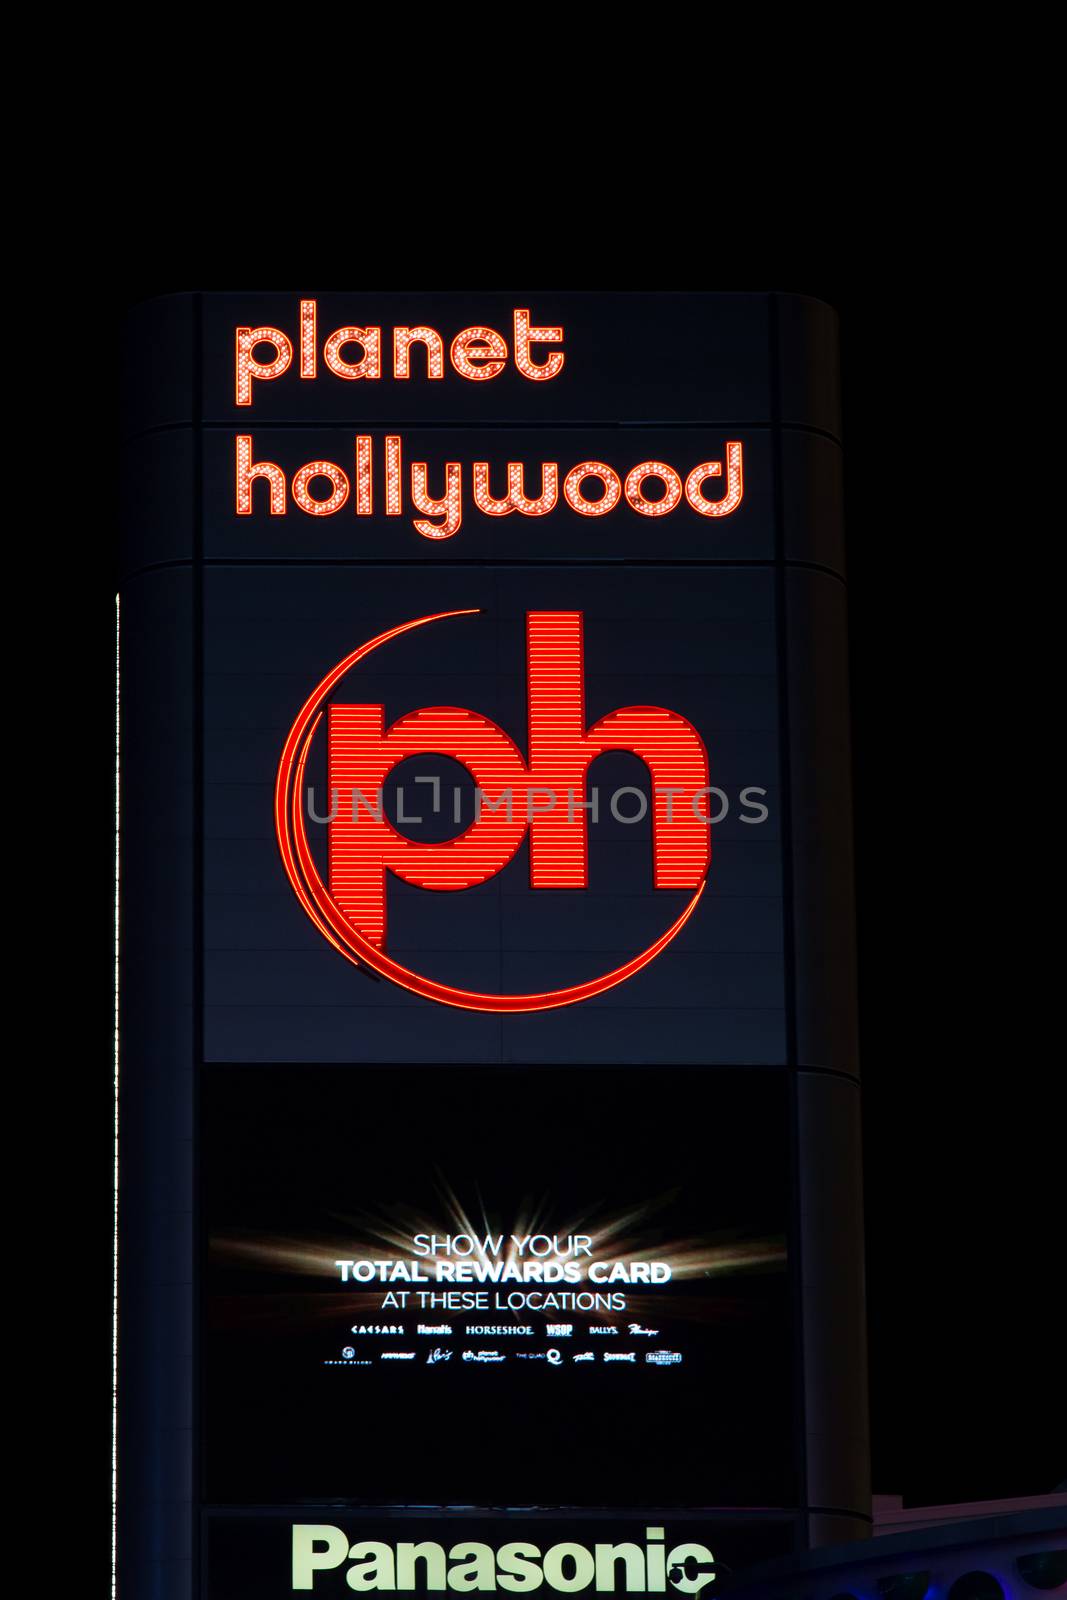 LAS VEGAS, NV/USA - FEBRUARY 14, 2016: Planet Hollywood exterior sign and logo at The Forum Shops at Caesars. Planet Hollywood International, Inc. is a theme restaurant.